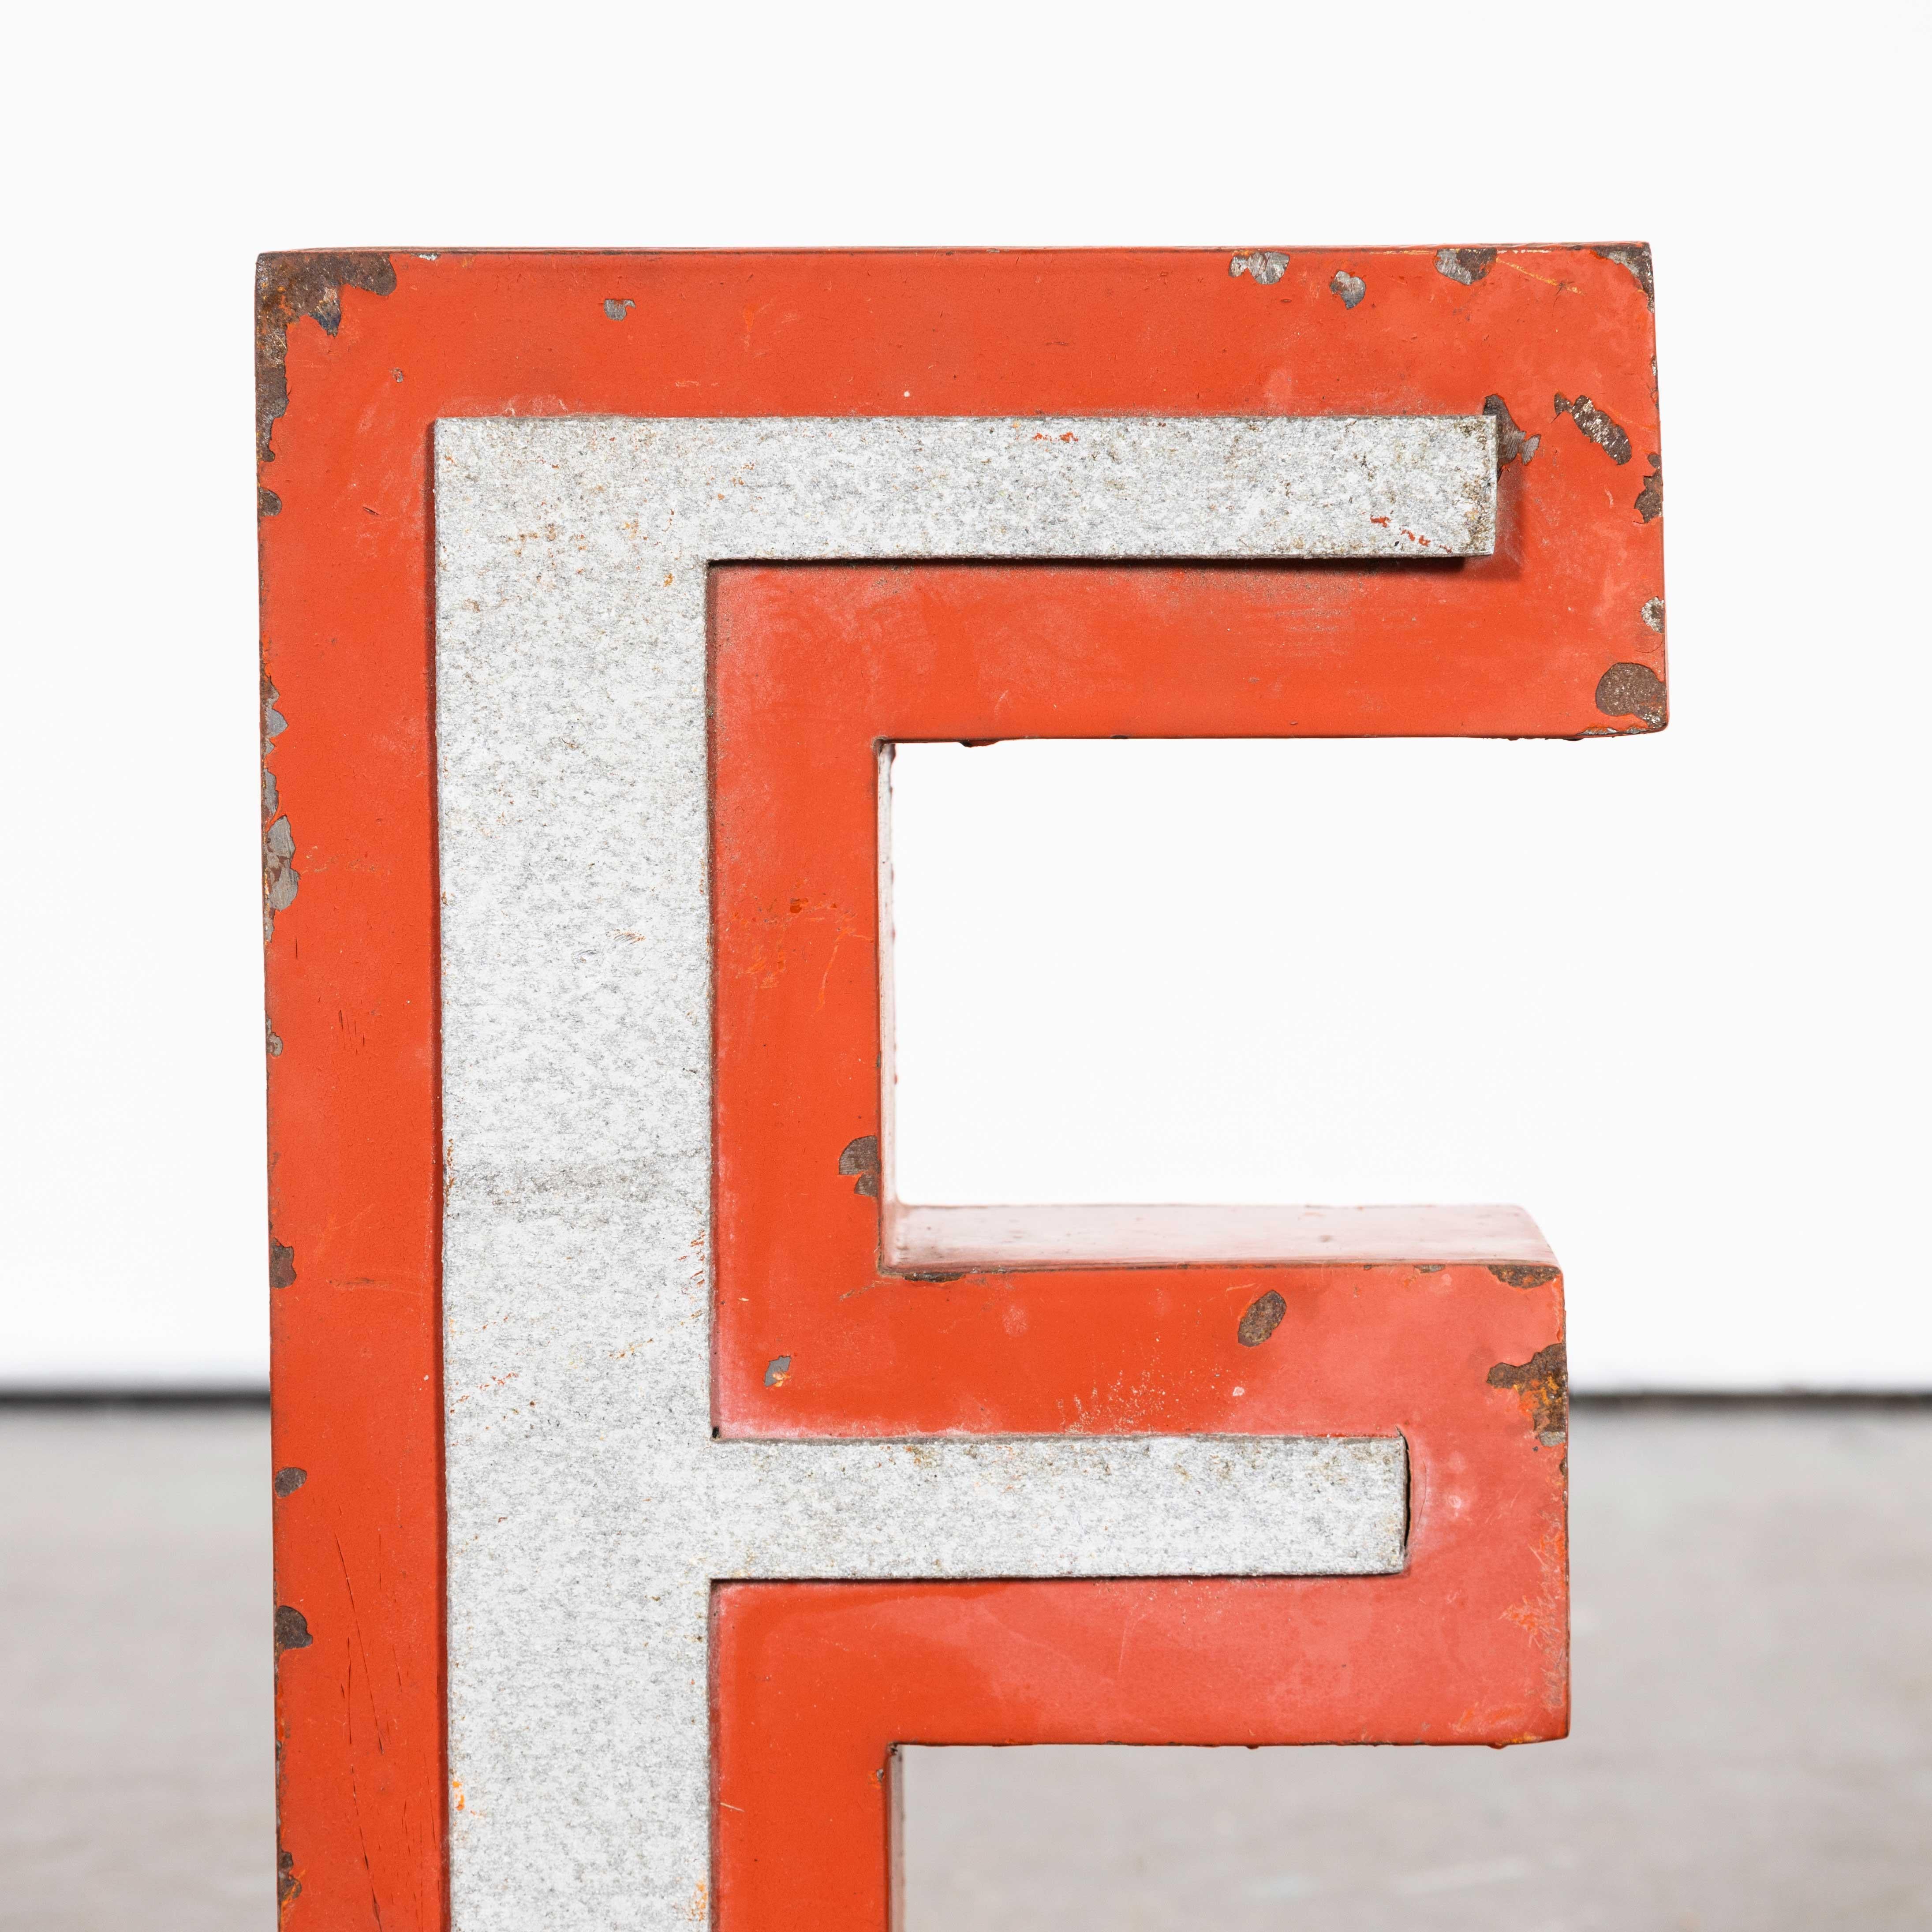 Chunky Vintage French Signage Letter – Medium E
Chunky Vintage French Signage Letter . Chunky and heavy weight signage letter with lovely faded paint. Dimensions 7x30x17 LHW all cm.

WORKSHOP REPORT
Our workshop team inspect every product and carry